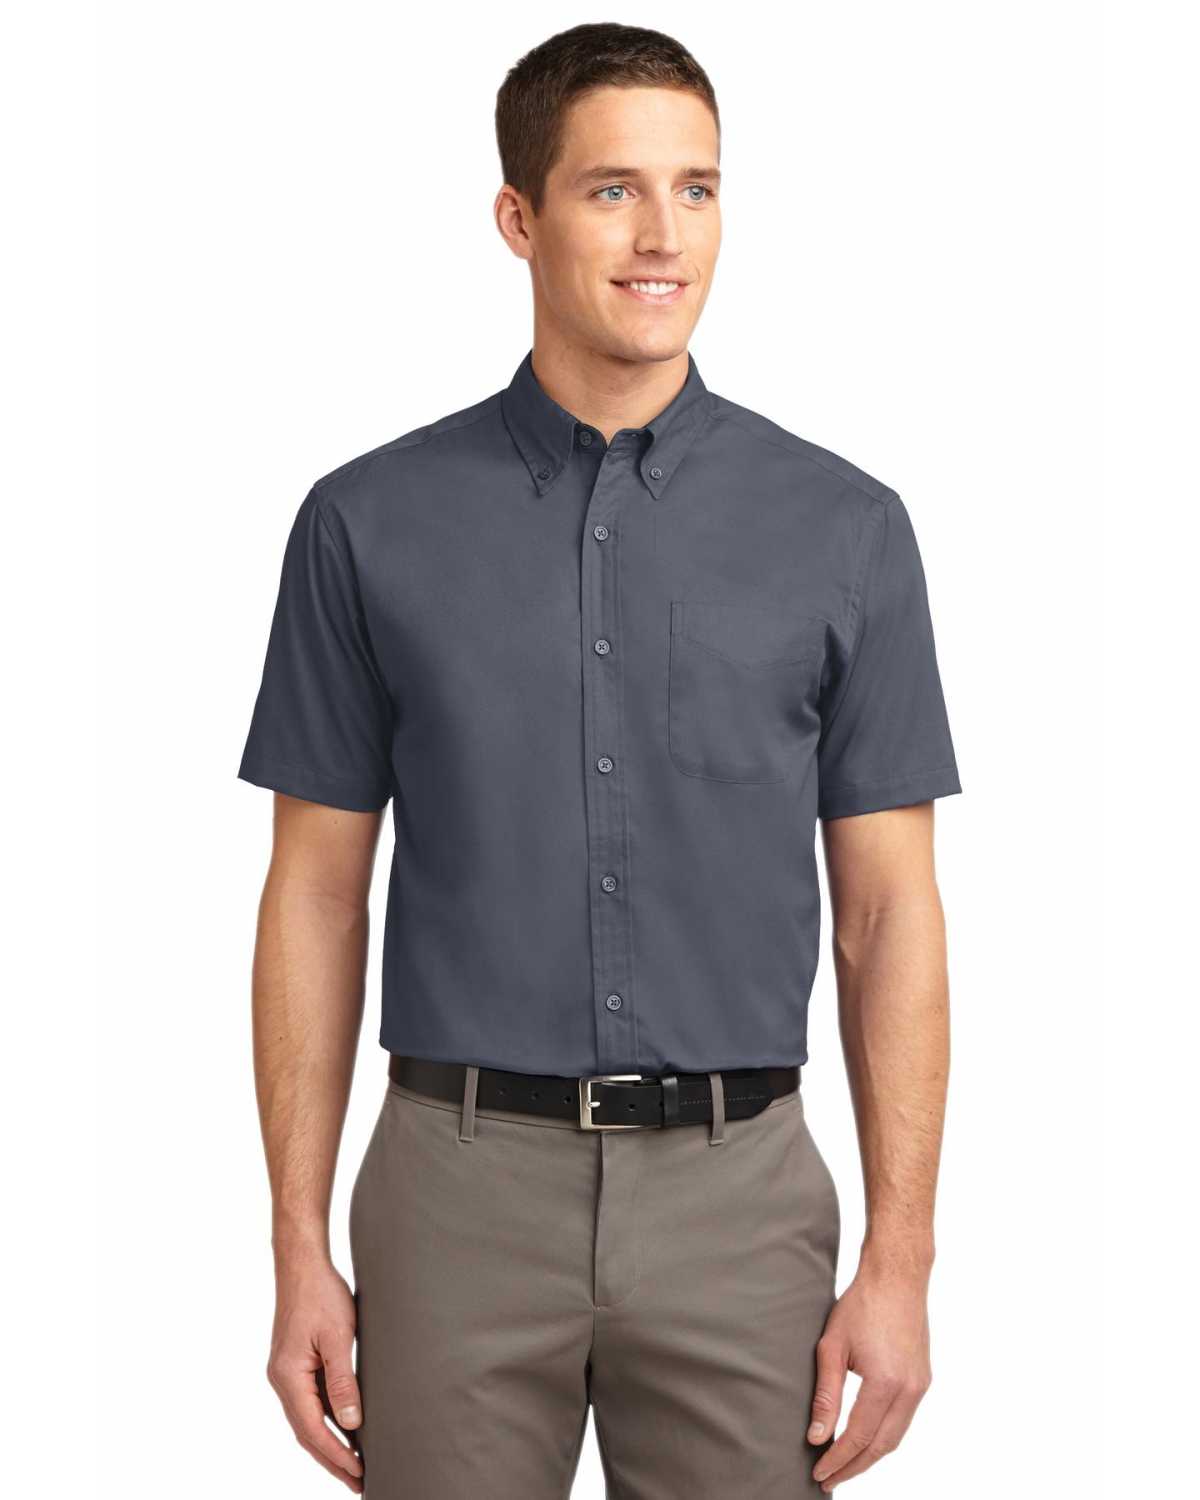 Port Authority S508 Short Sleeve Easy Care Shirt on discount ...